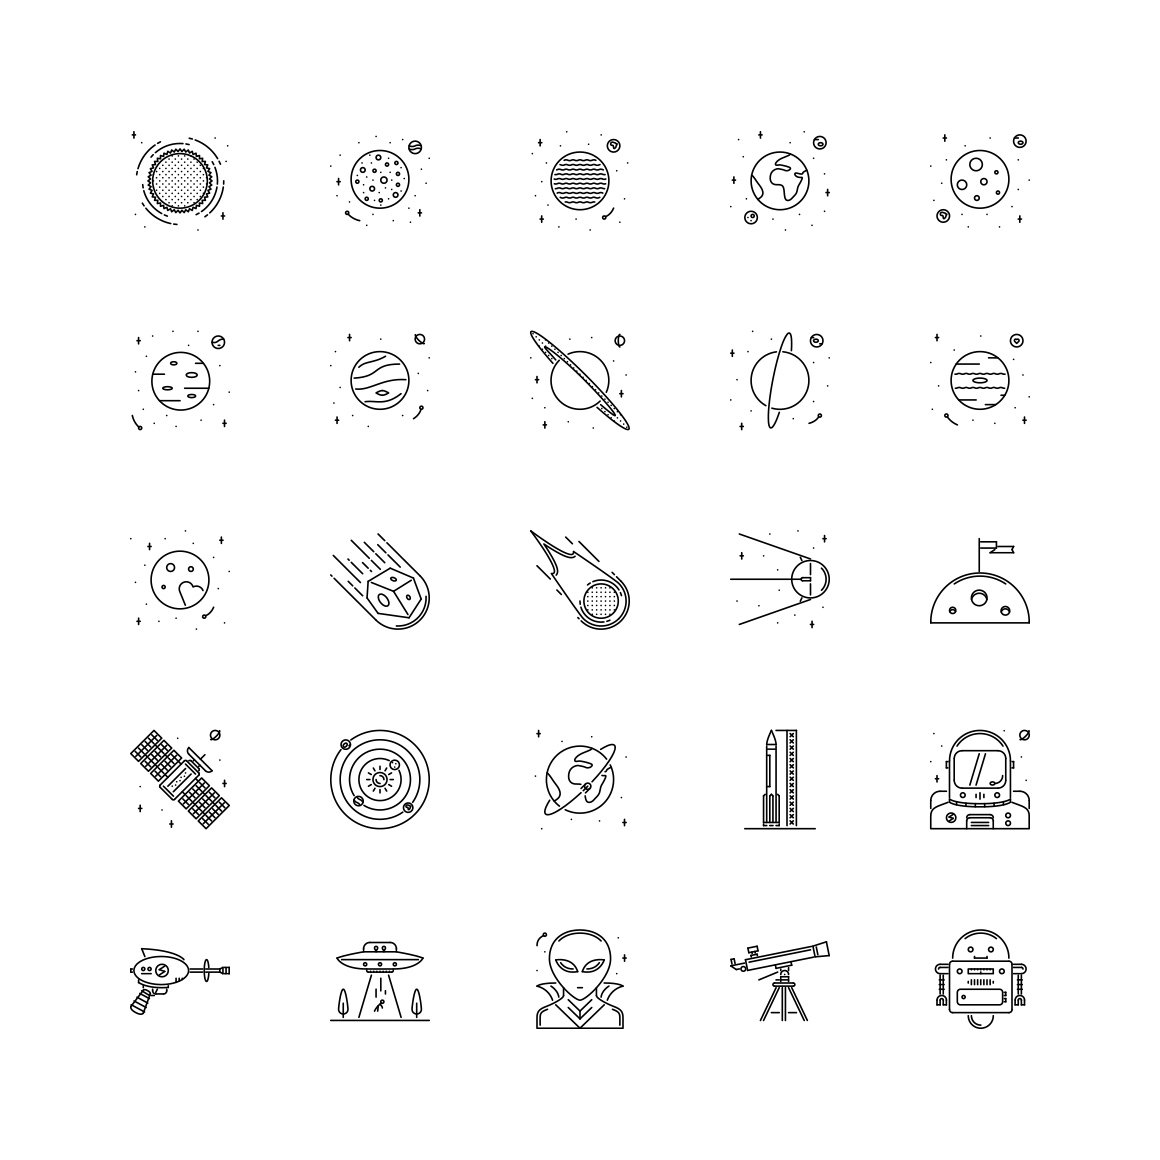 The Space Outline Icons 25 preview image.